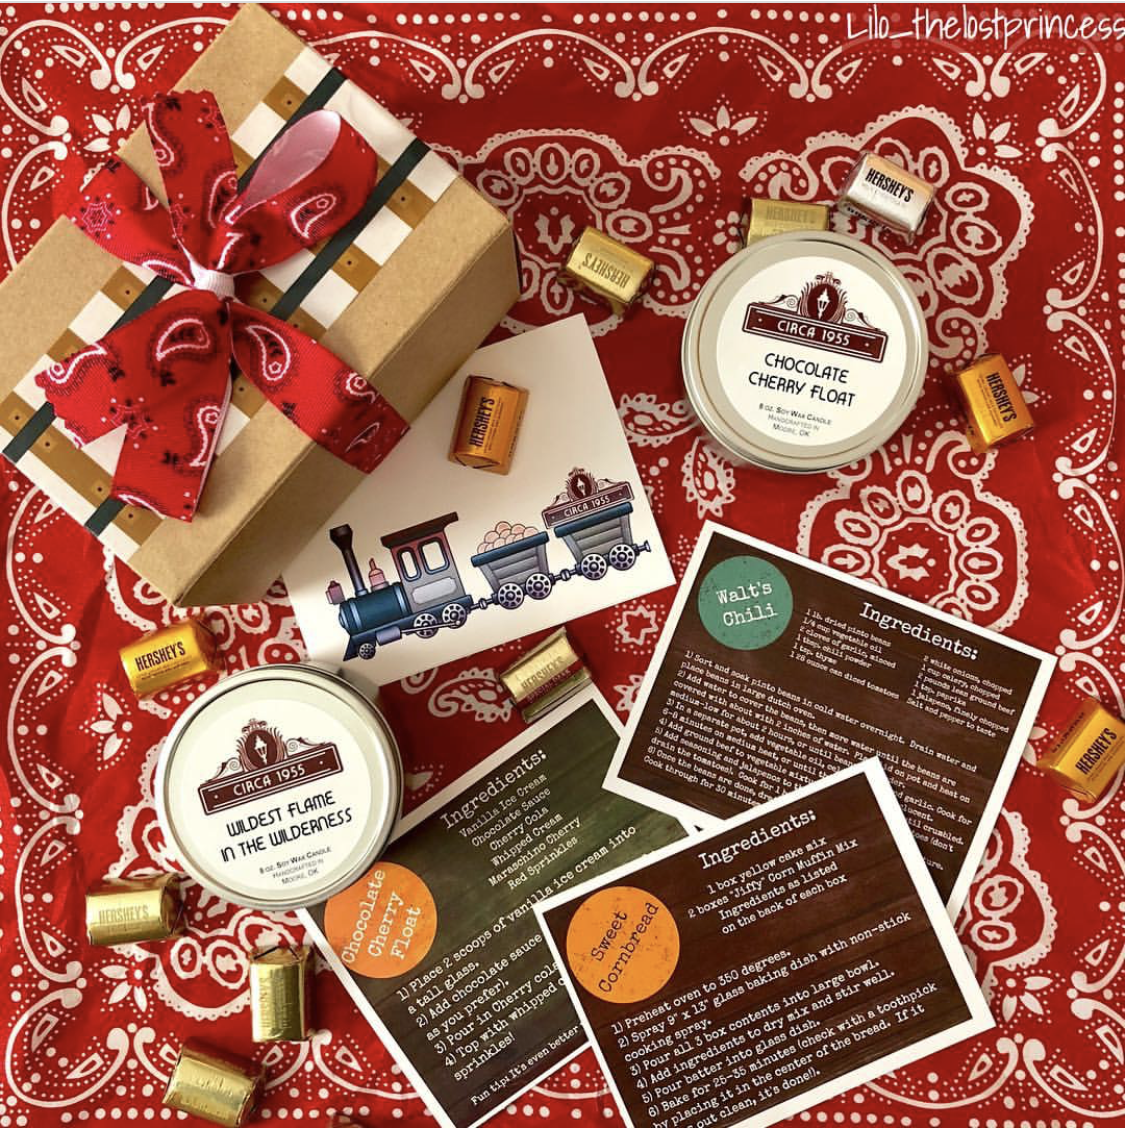 two candle tins on a red bandana with nugget candies, recipe cards and train-track wrapped box